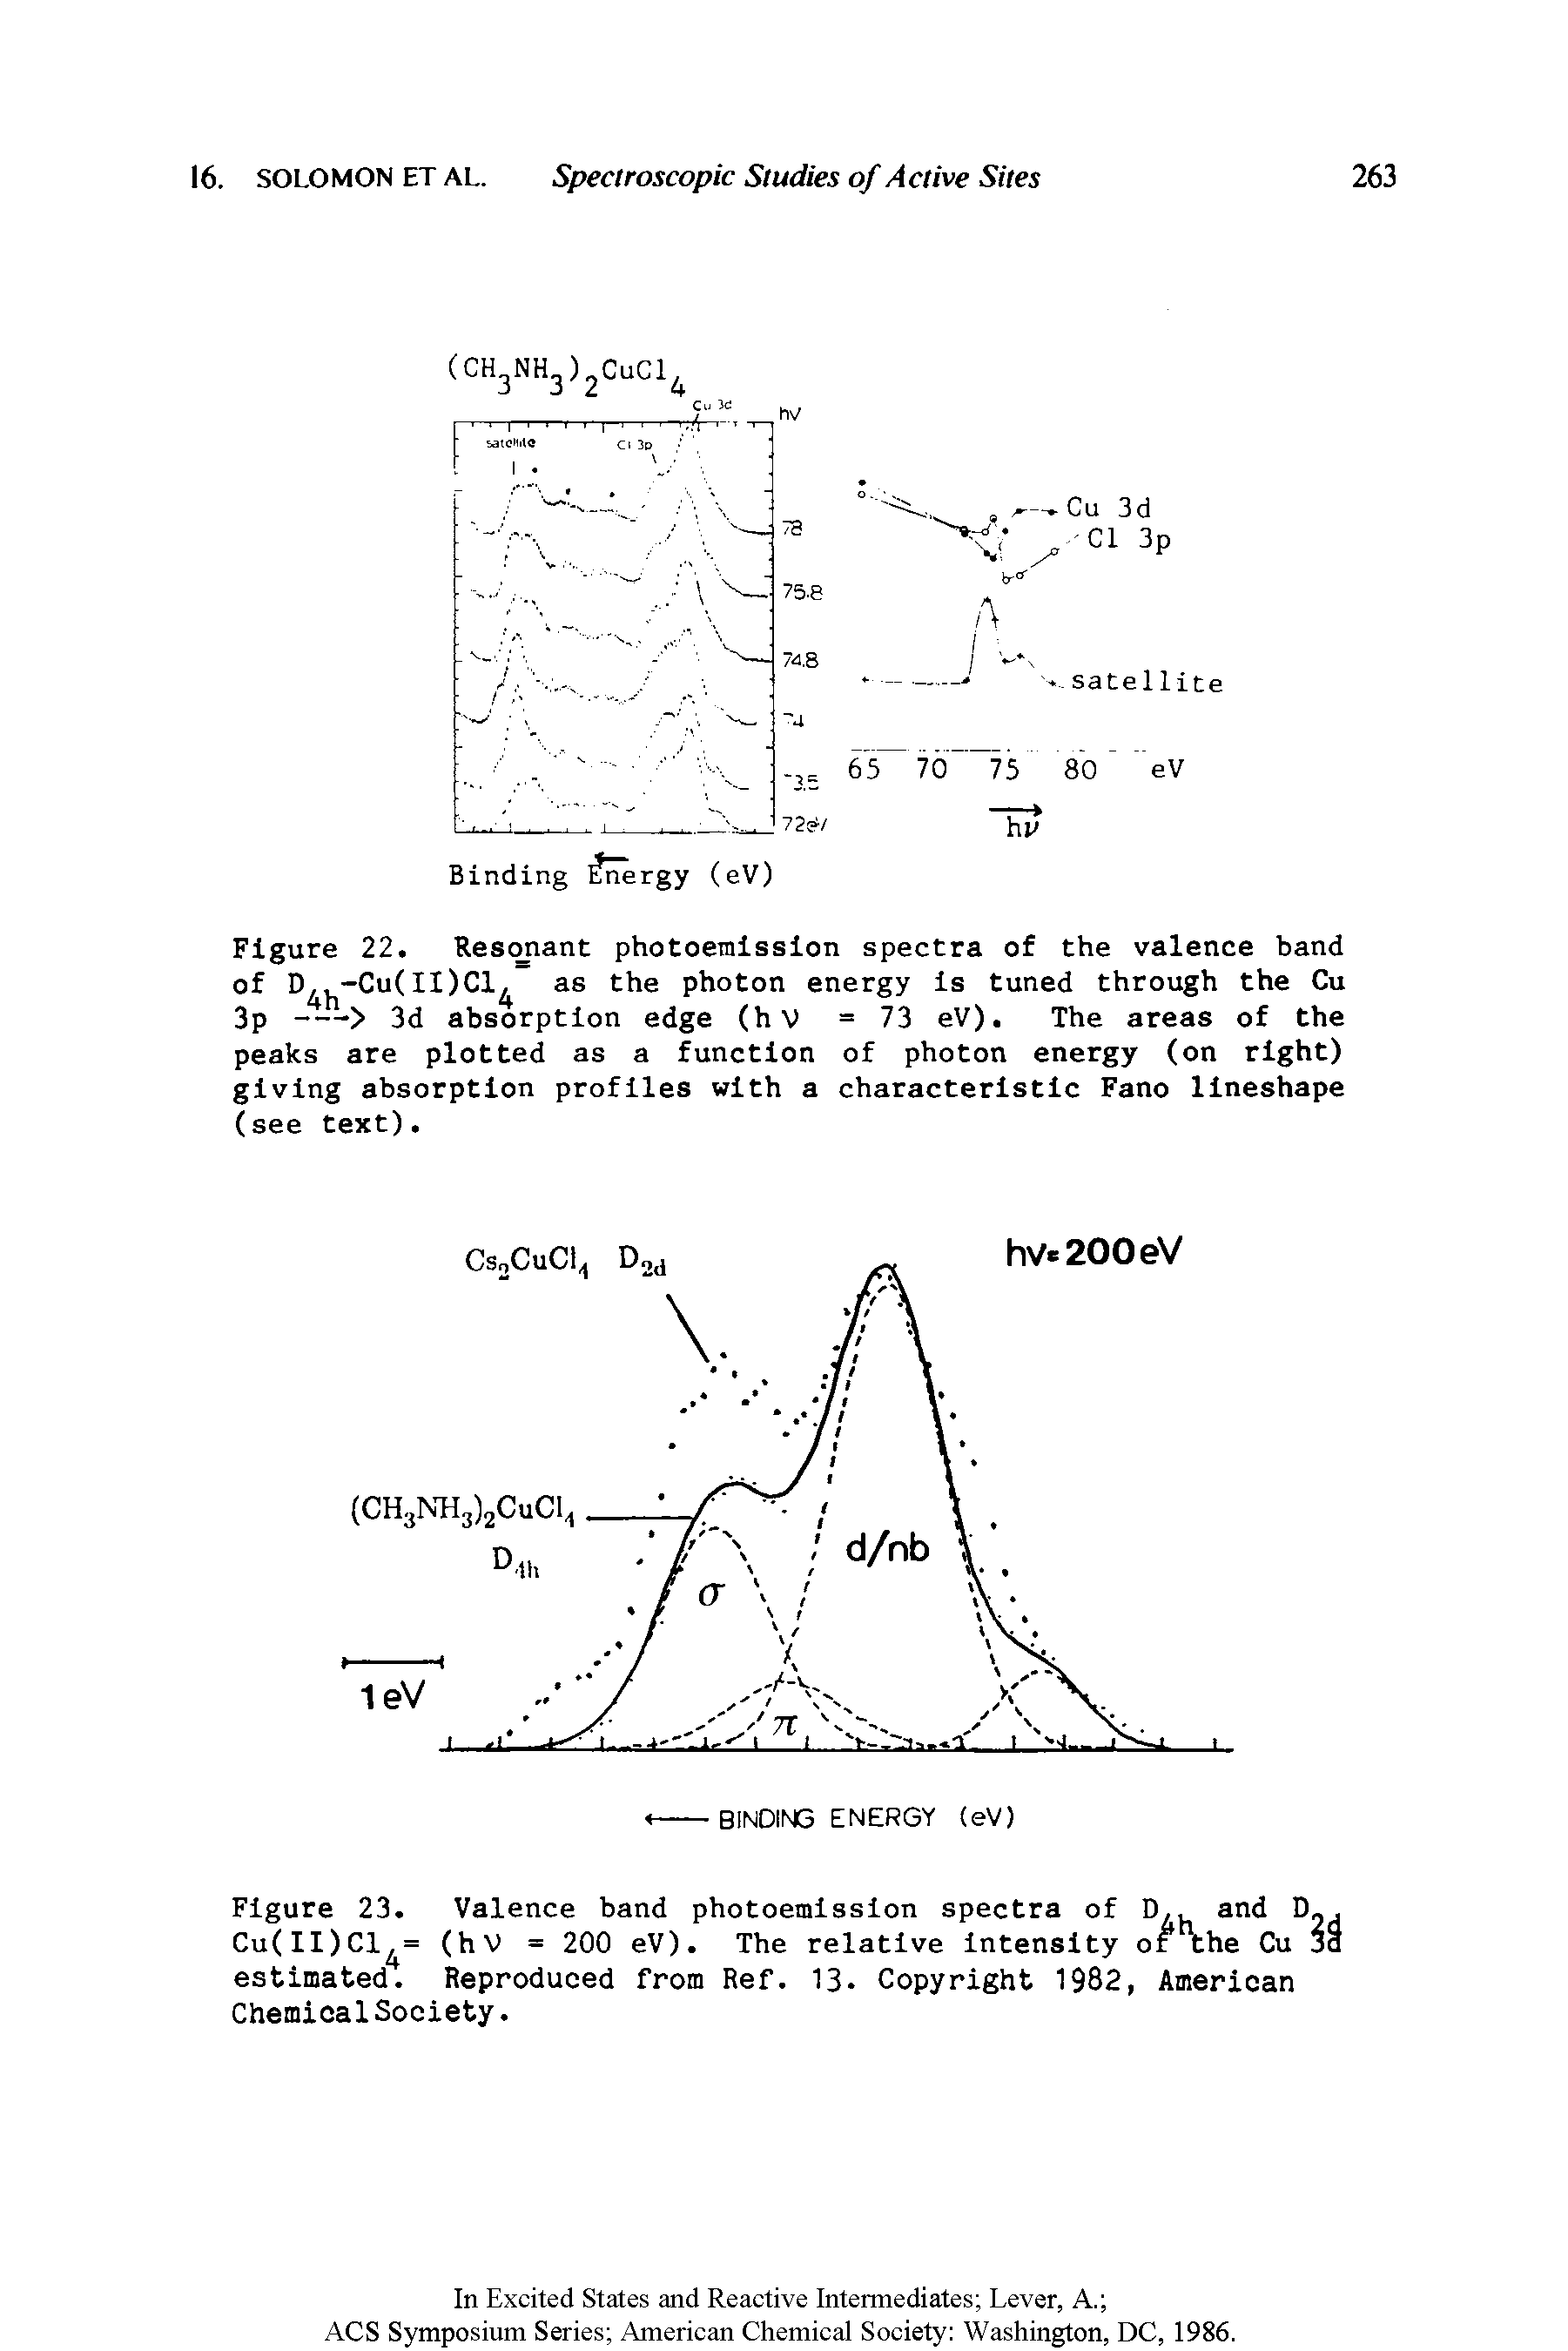 Figure 23. Valence band photoemission spectra of D, and D-. Cu(II)Cl = (hv = 200 eV). The relative intensity of Yhe Cu 3d estimated. Reproduced from Ref. 13 Copyright 1982, American Chemical Society.